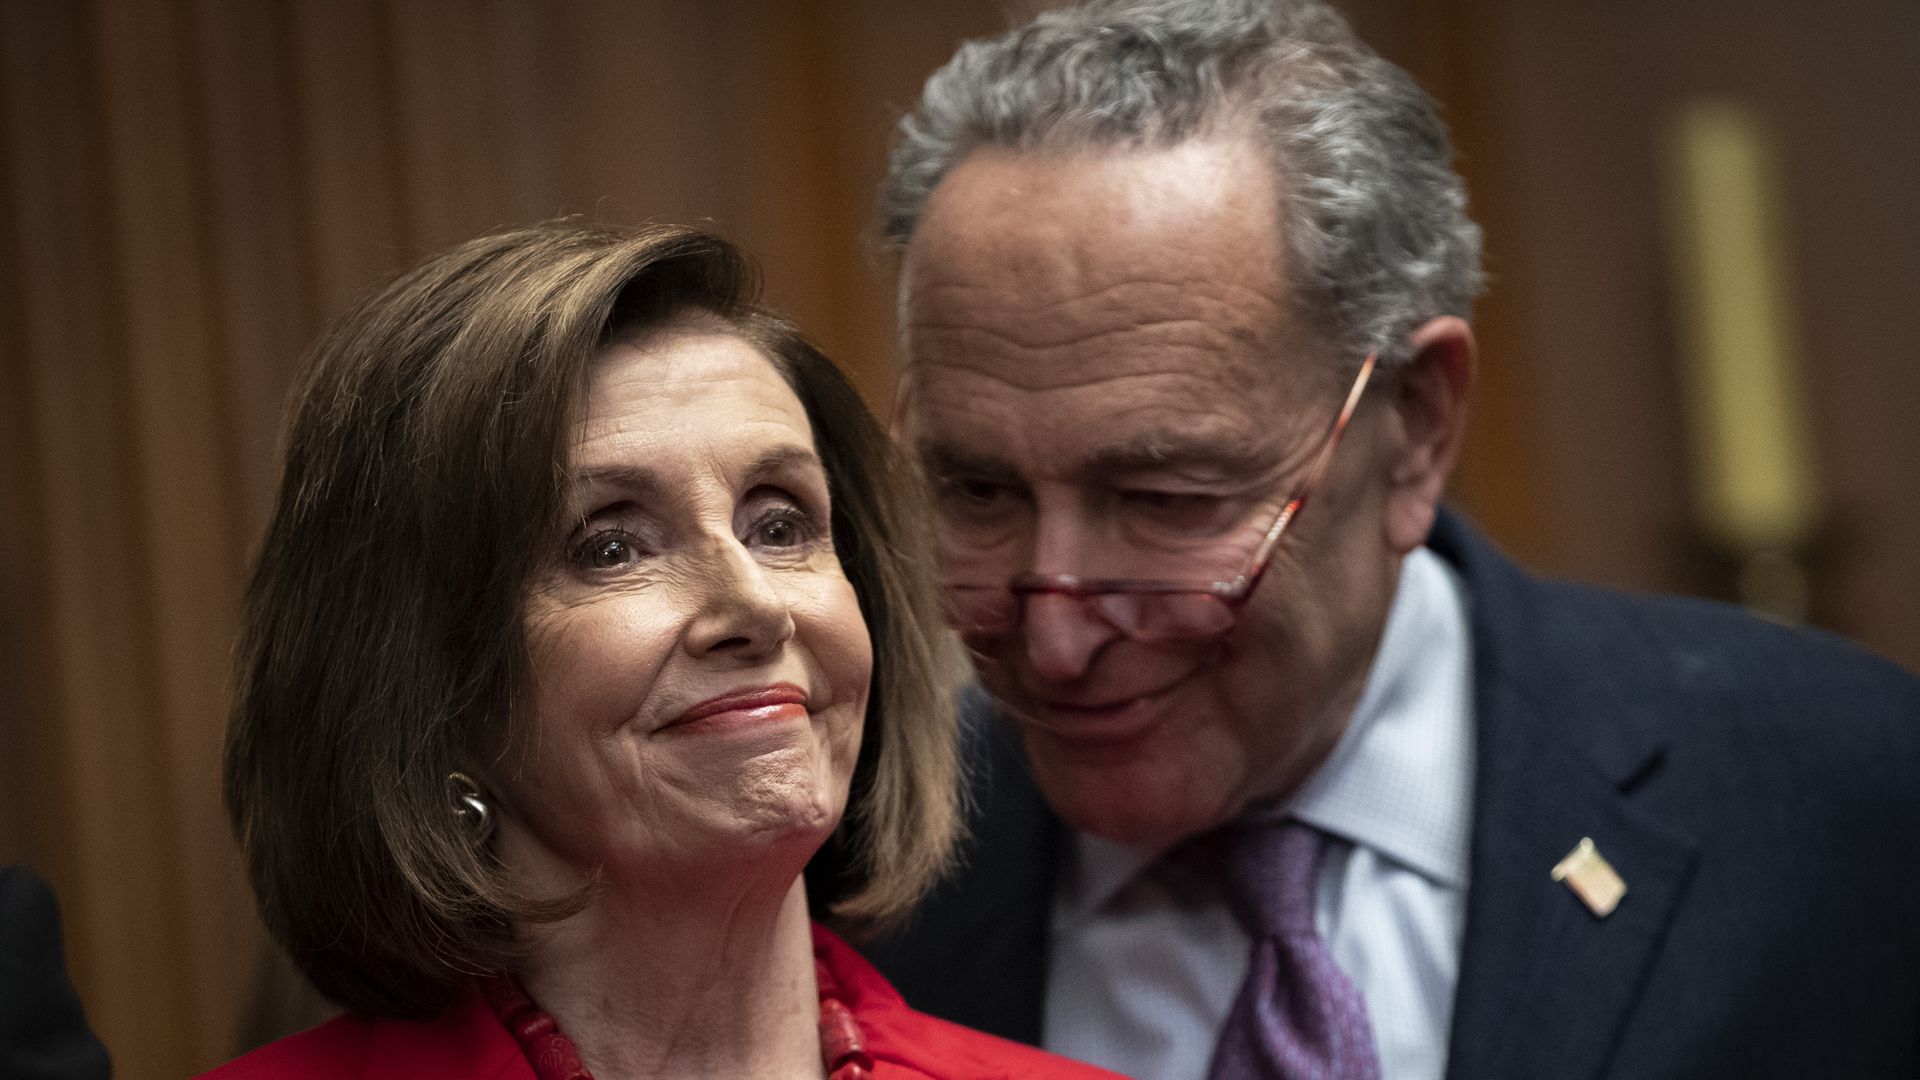 House Speaker Nancy Pelosi and Senate Minority Leader Chuck Schumer stand next to one another at a news conference.